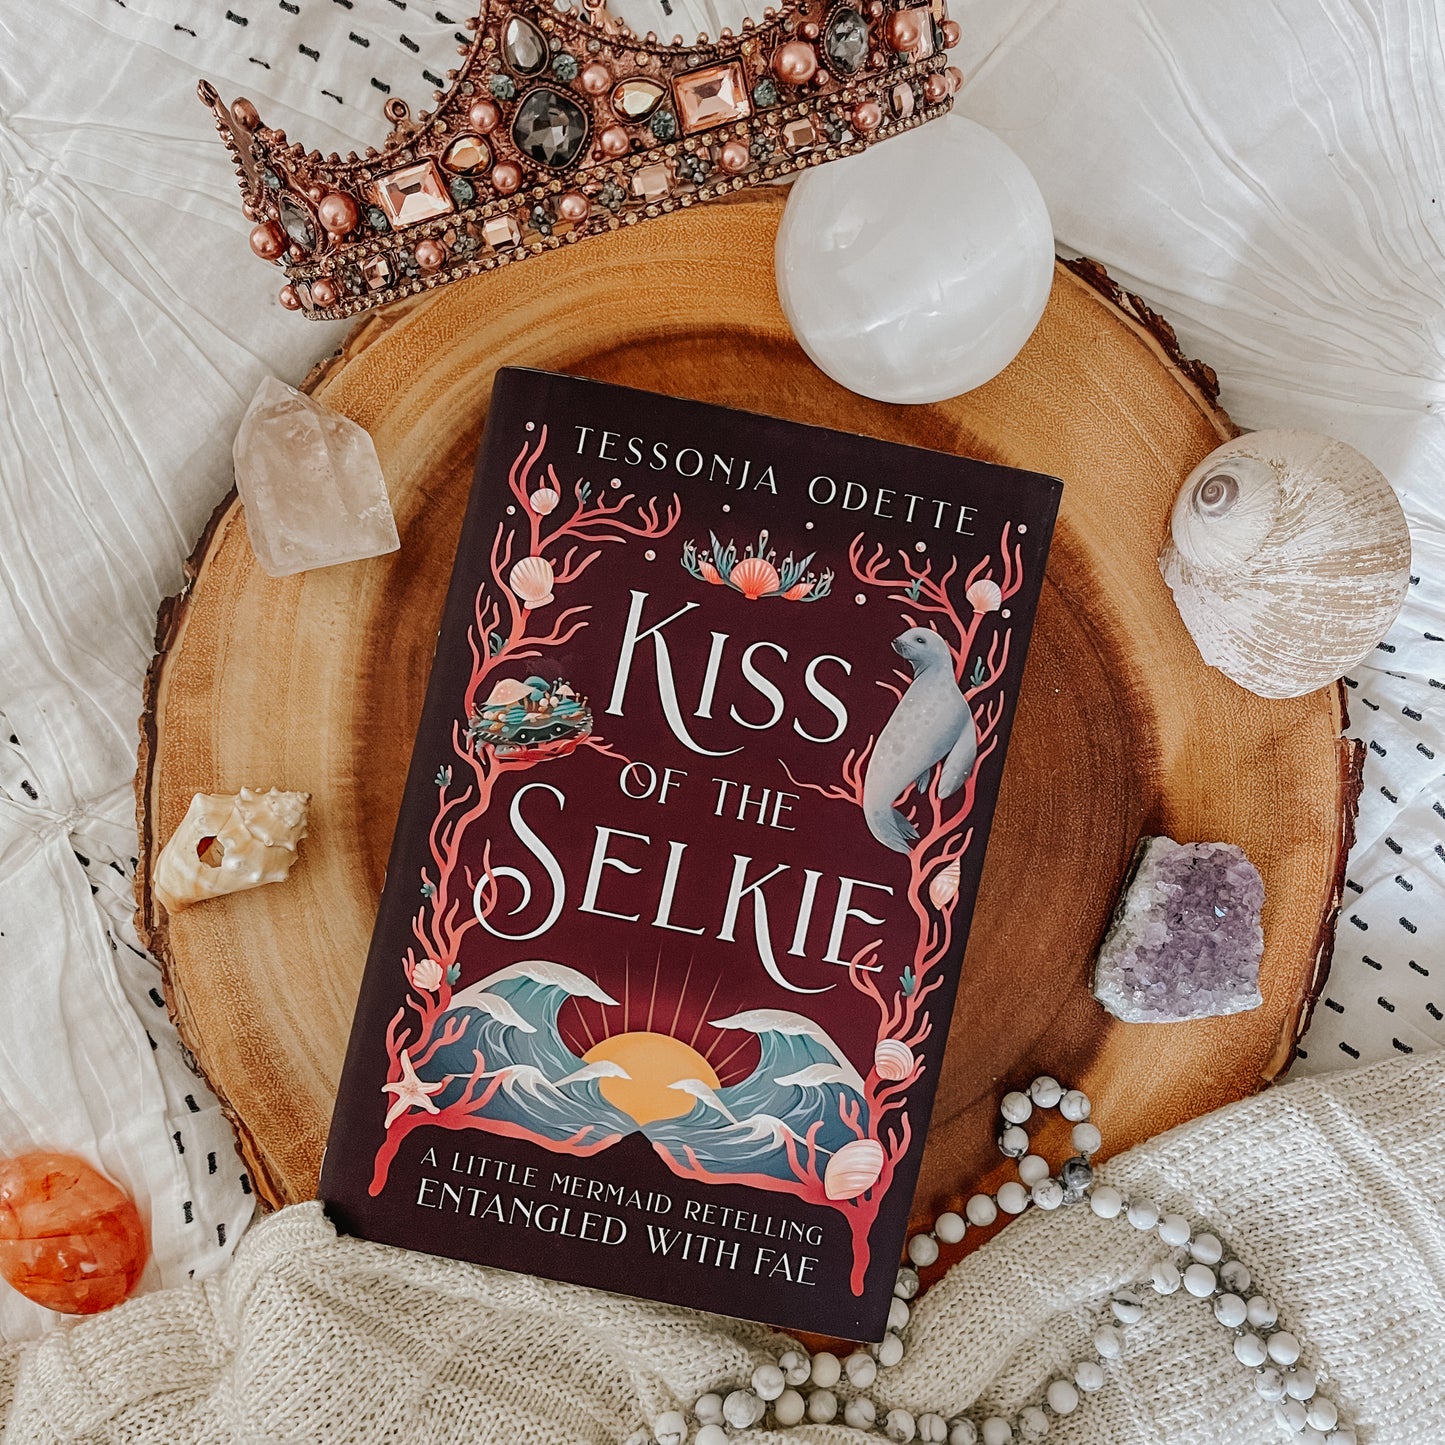 Kiss of the Selkie (hardcover) signed